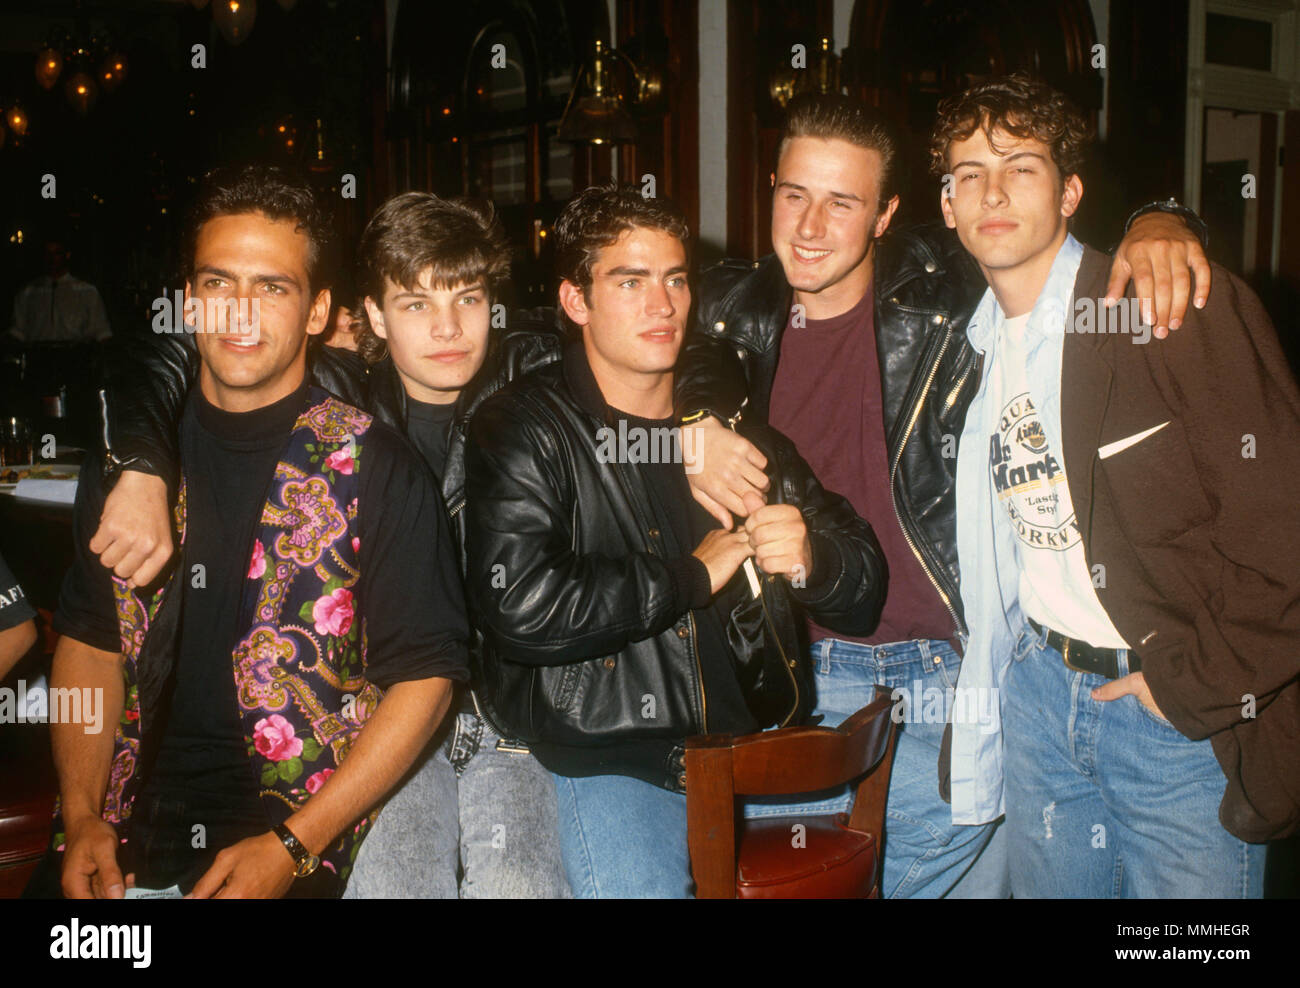 SHERMAN OAKS, CA - MAY 19: Actors Robert Rusler, Jay R. Ferguson, Rodney Harvey, David Arquette and Harold Pruett attend event for 'The Outsiders' television series at Sherman Oaks Galleria on May 19, 1990 in Sherman Oaks, California. Photo by Barry King/Alamy Stock Photo Stock Photo